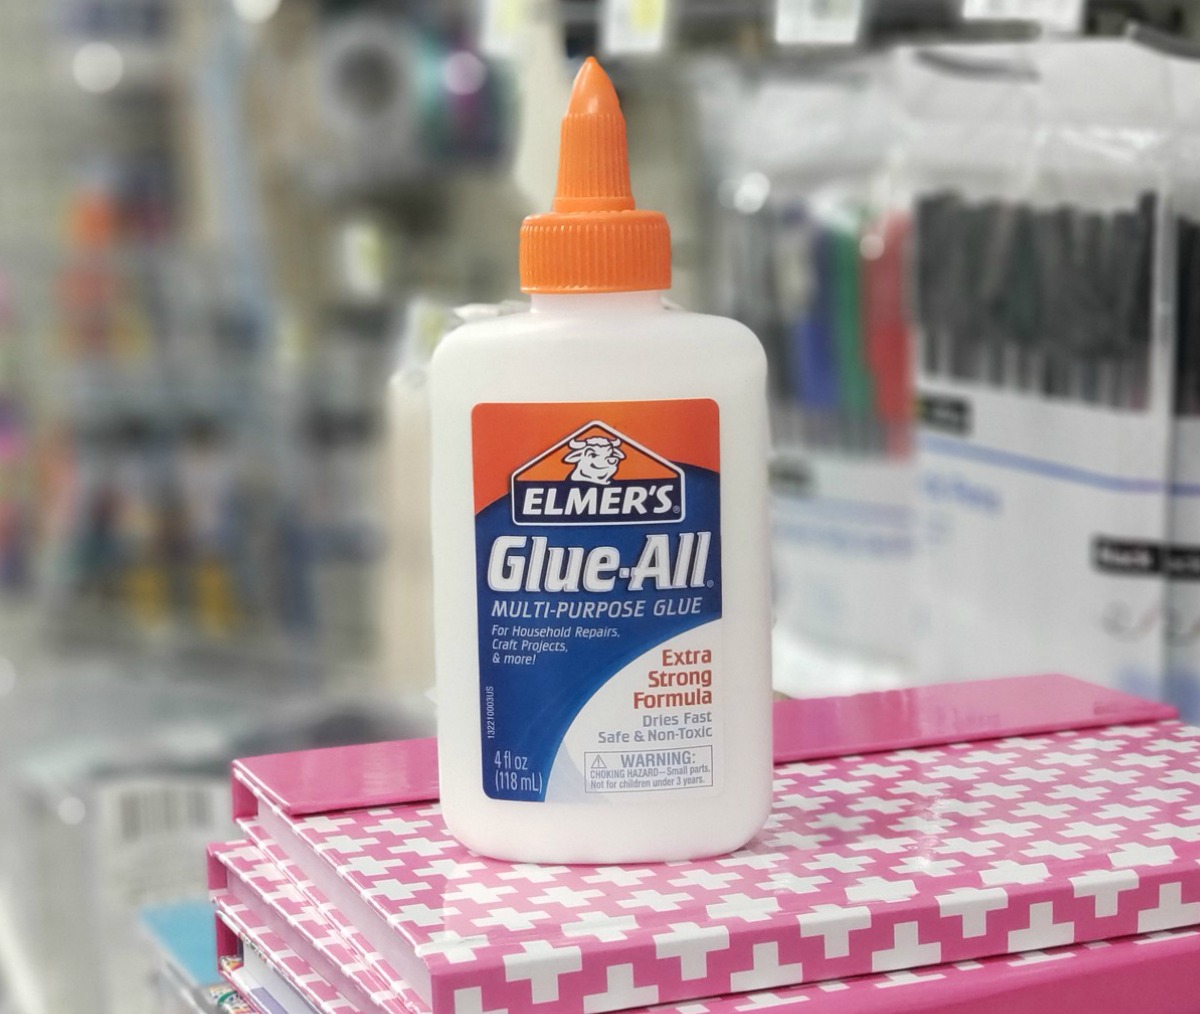 Bottle of glue on top of stack of school supplies in store